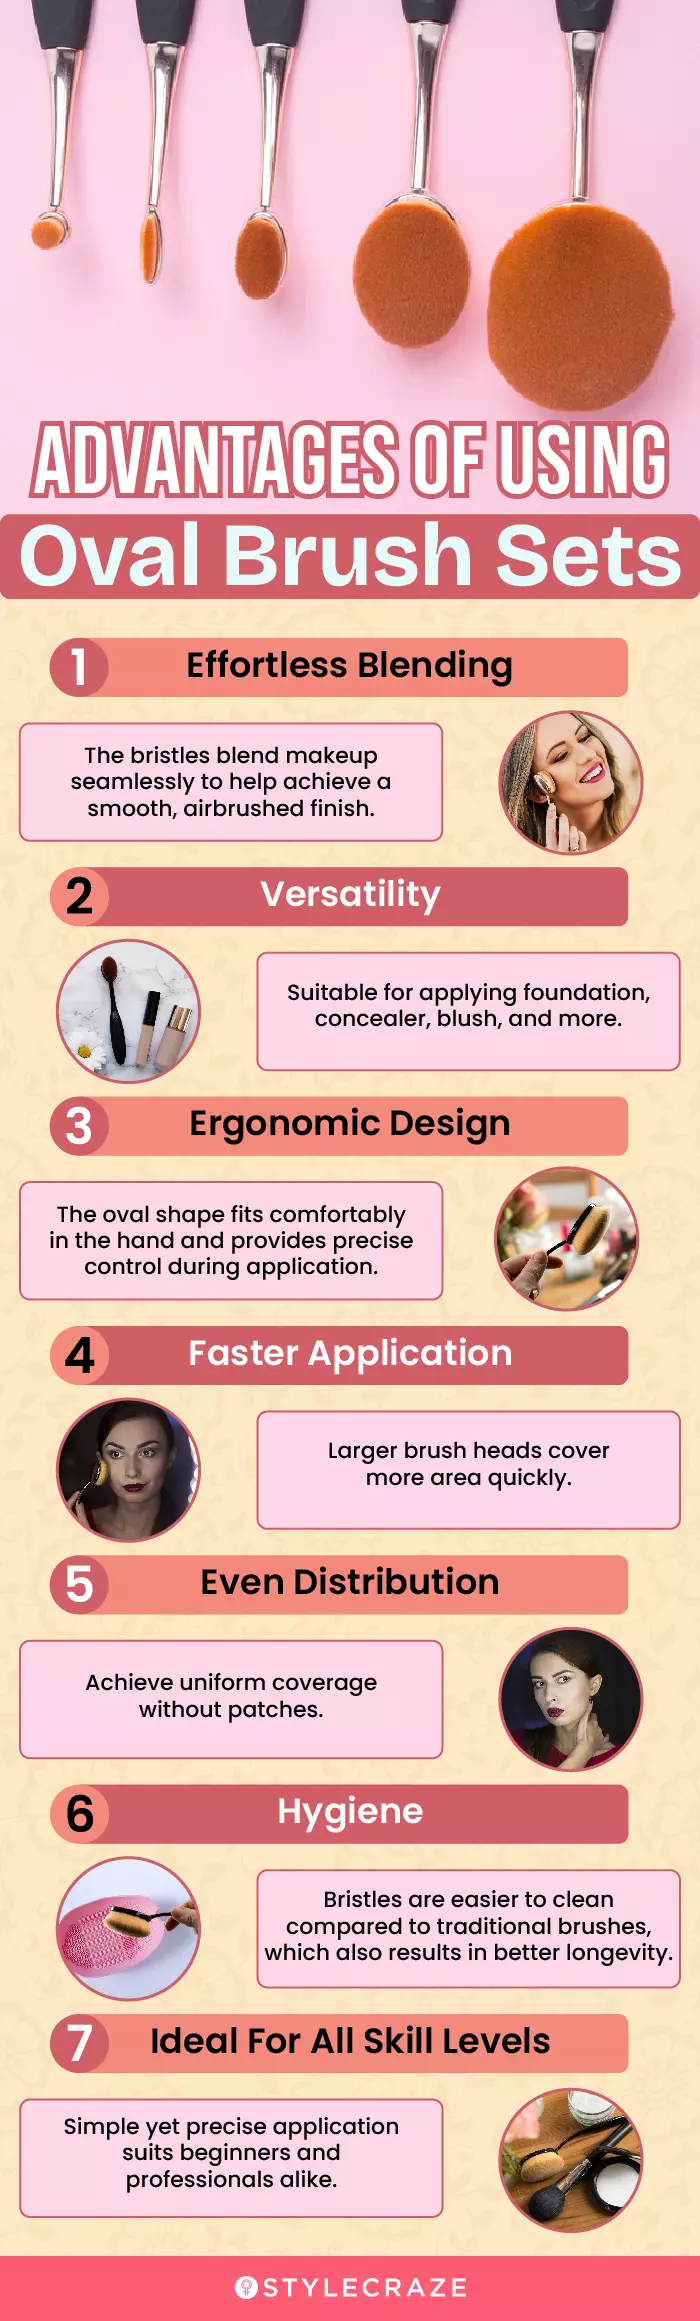 Advantages Of Using Oval Brush Sets (infographic)